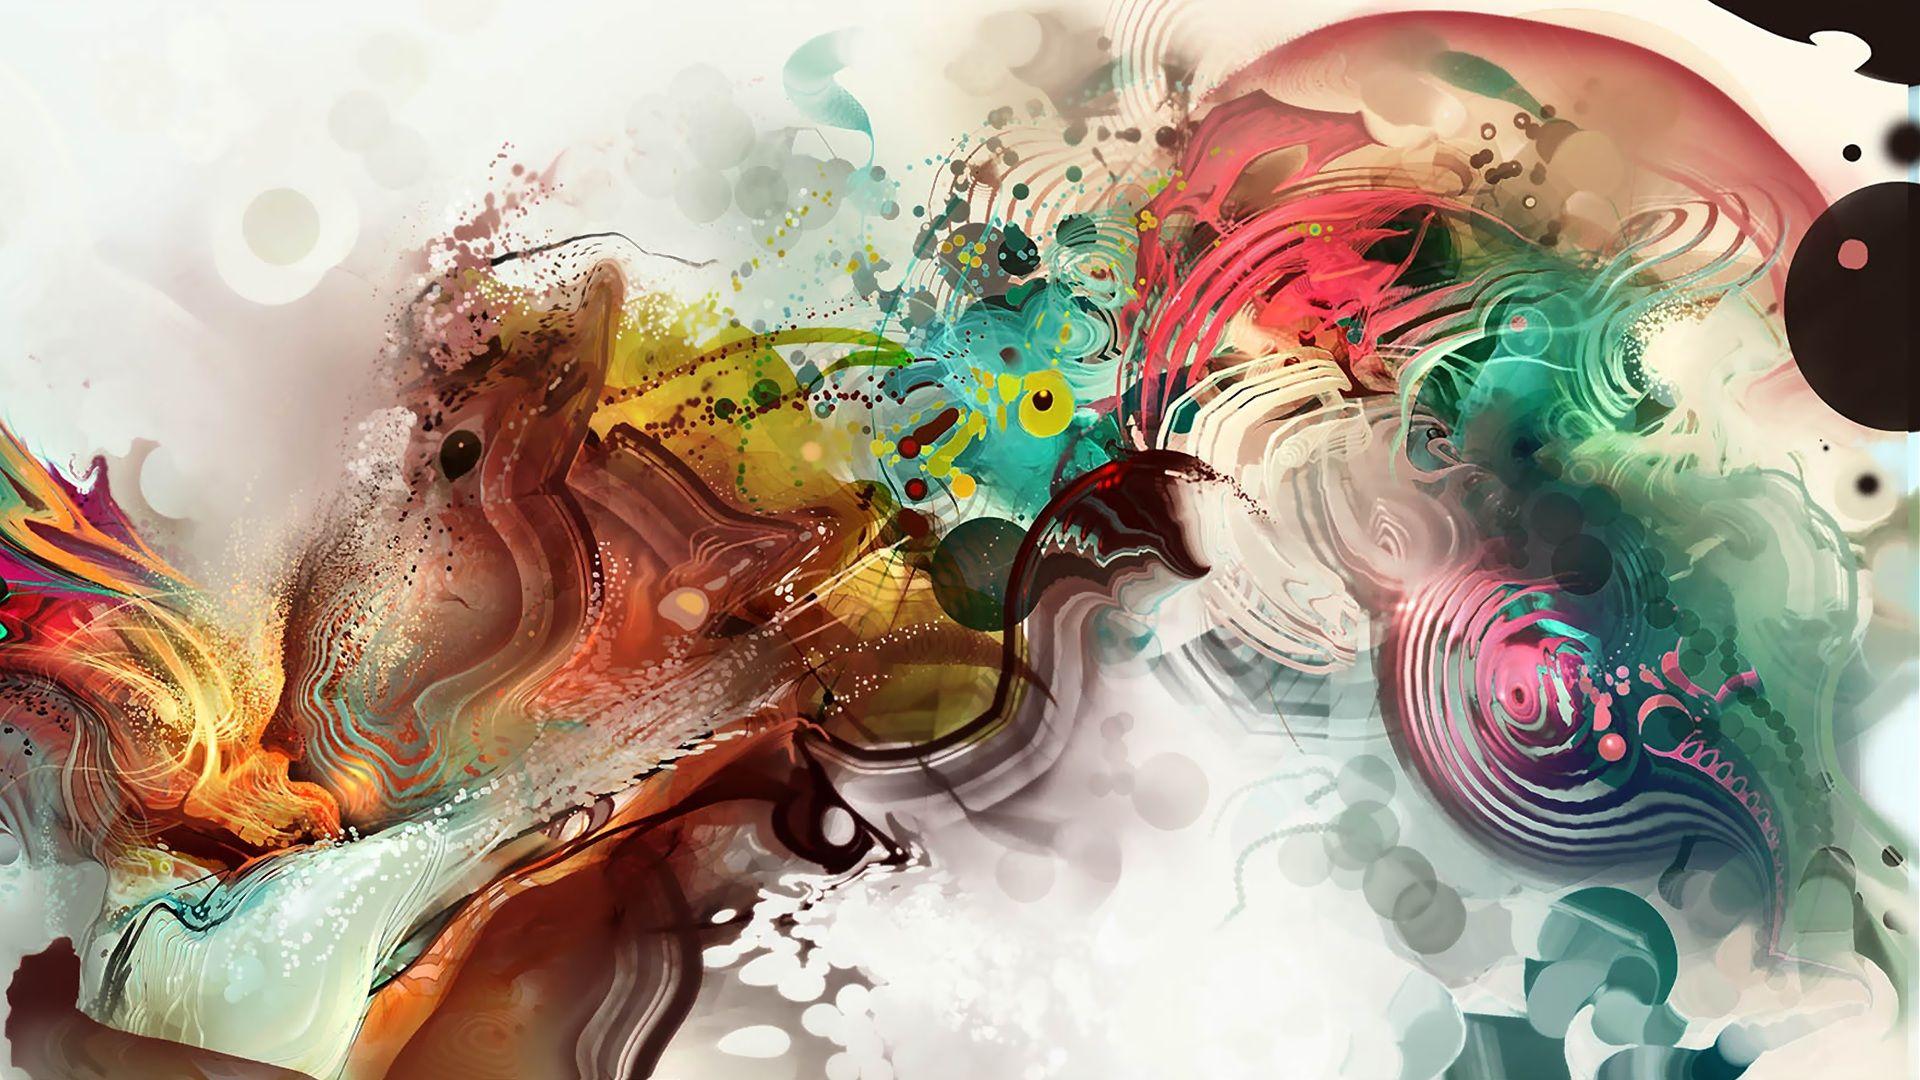 Artistic Abstract Wallpaper HD Resolution Free Download > SubWallpaper